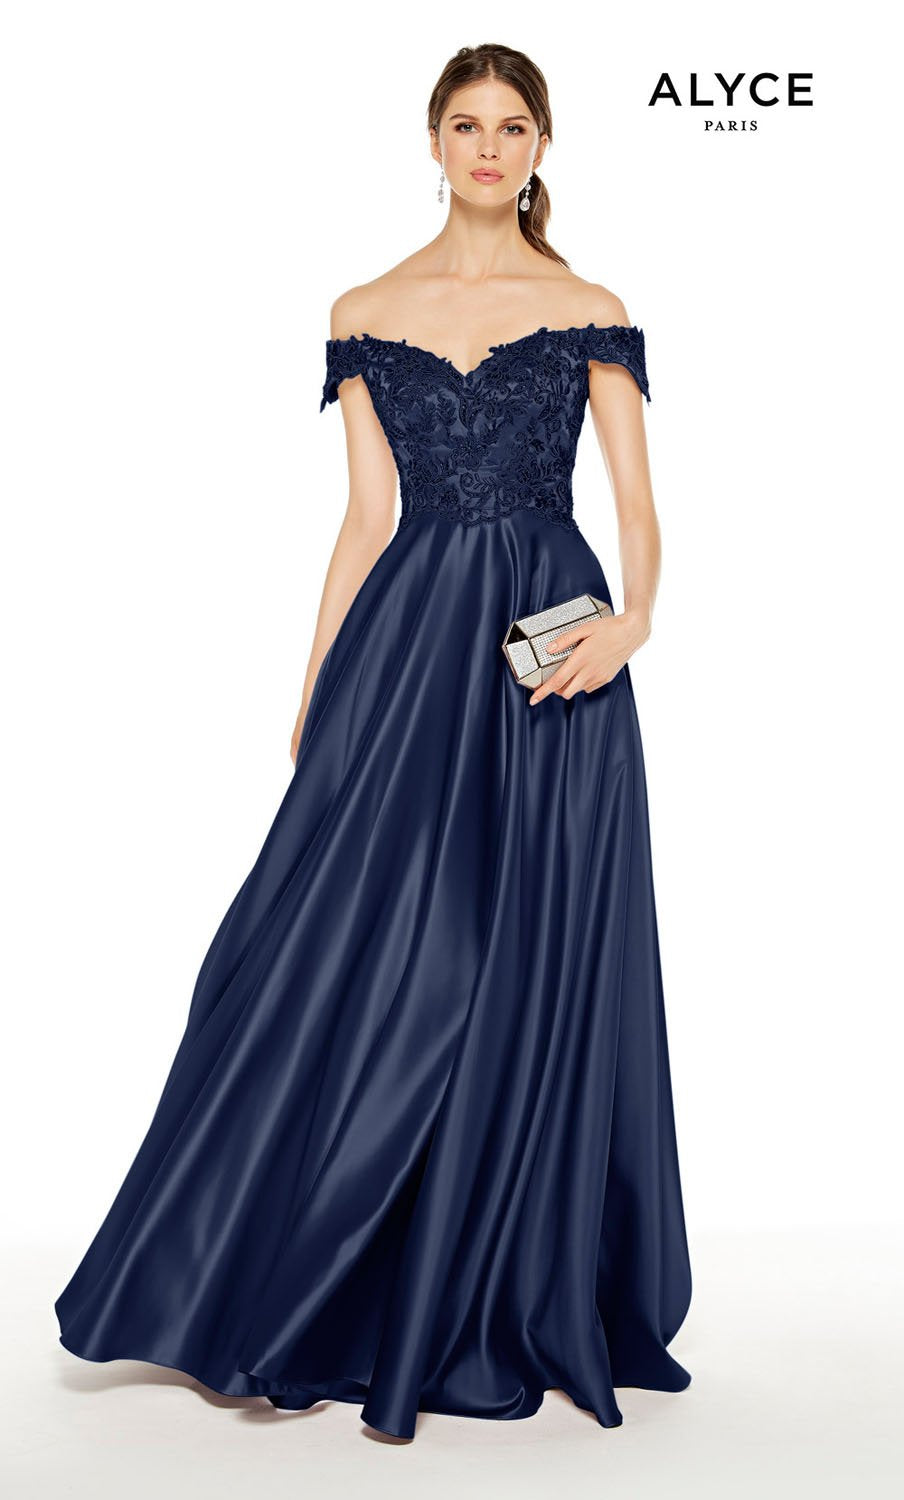 Alyce Paris 27393 dress images in these colors: Cashmere Rose, Navy.